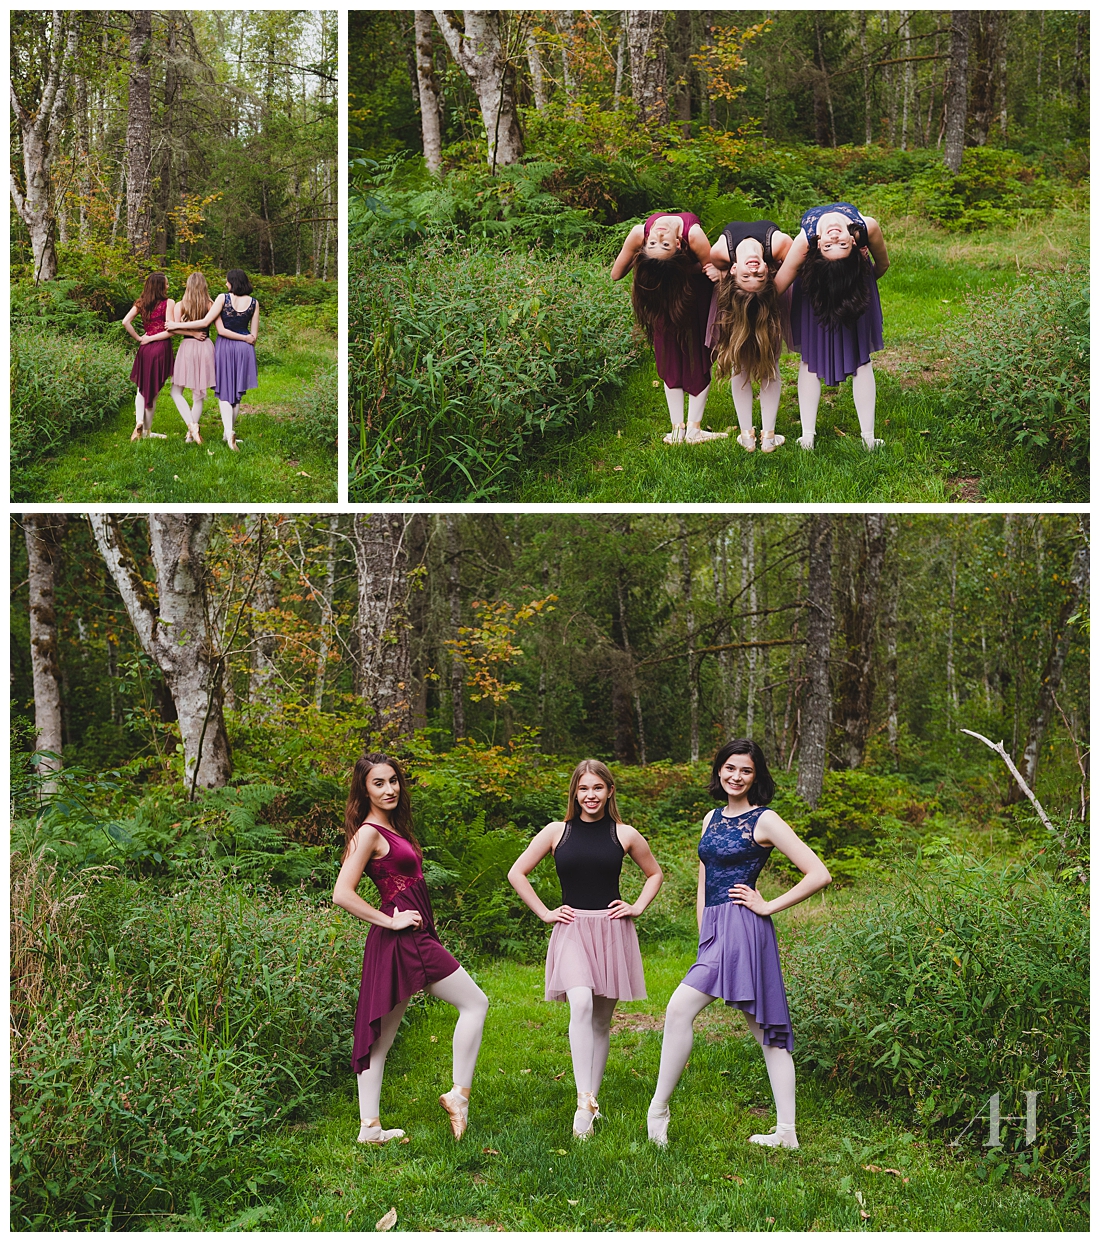 Ballerinas in Purple Costumes Posing in the Forest | Ballerina Portrait Sessions Photographed by Tacoma Senior Photographer Amanda Howse